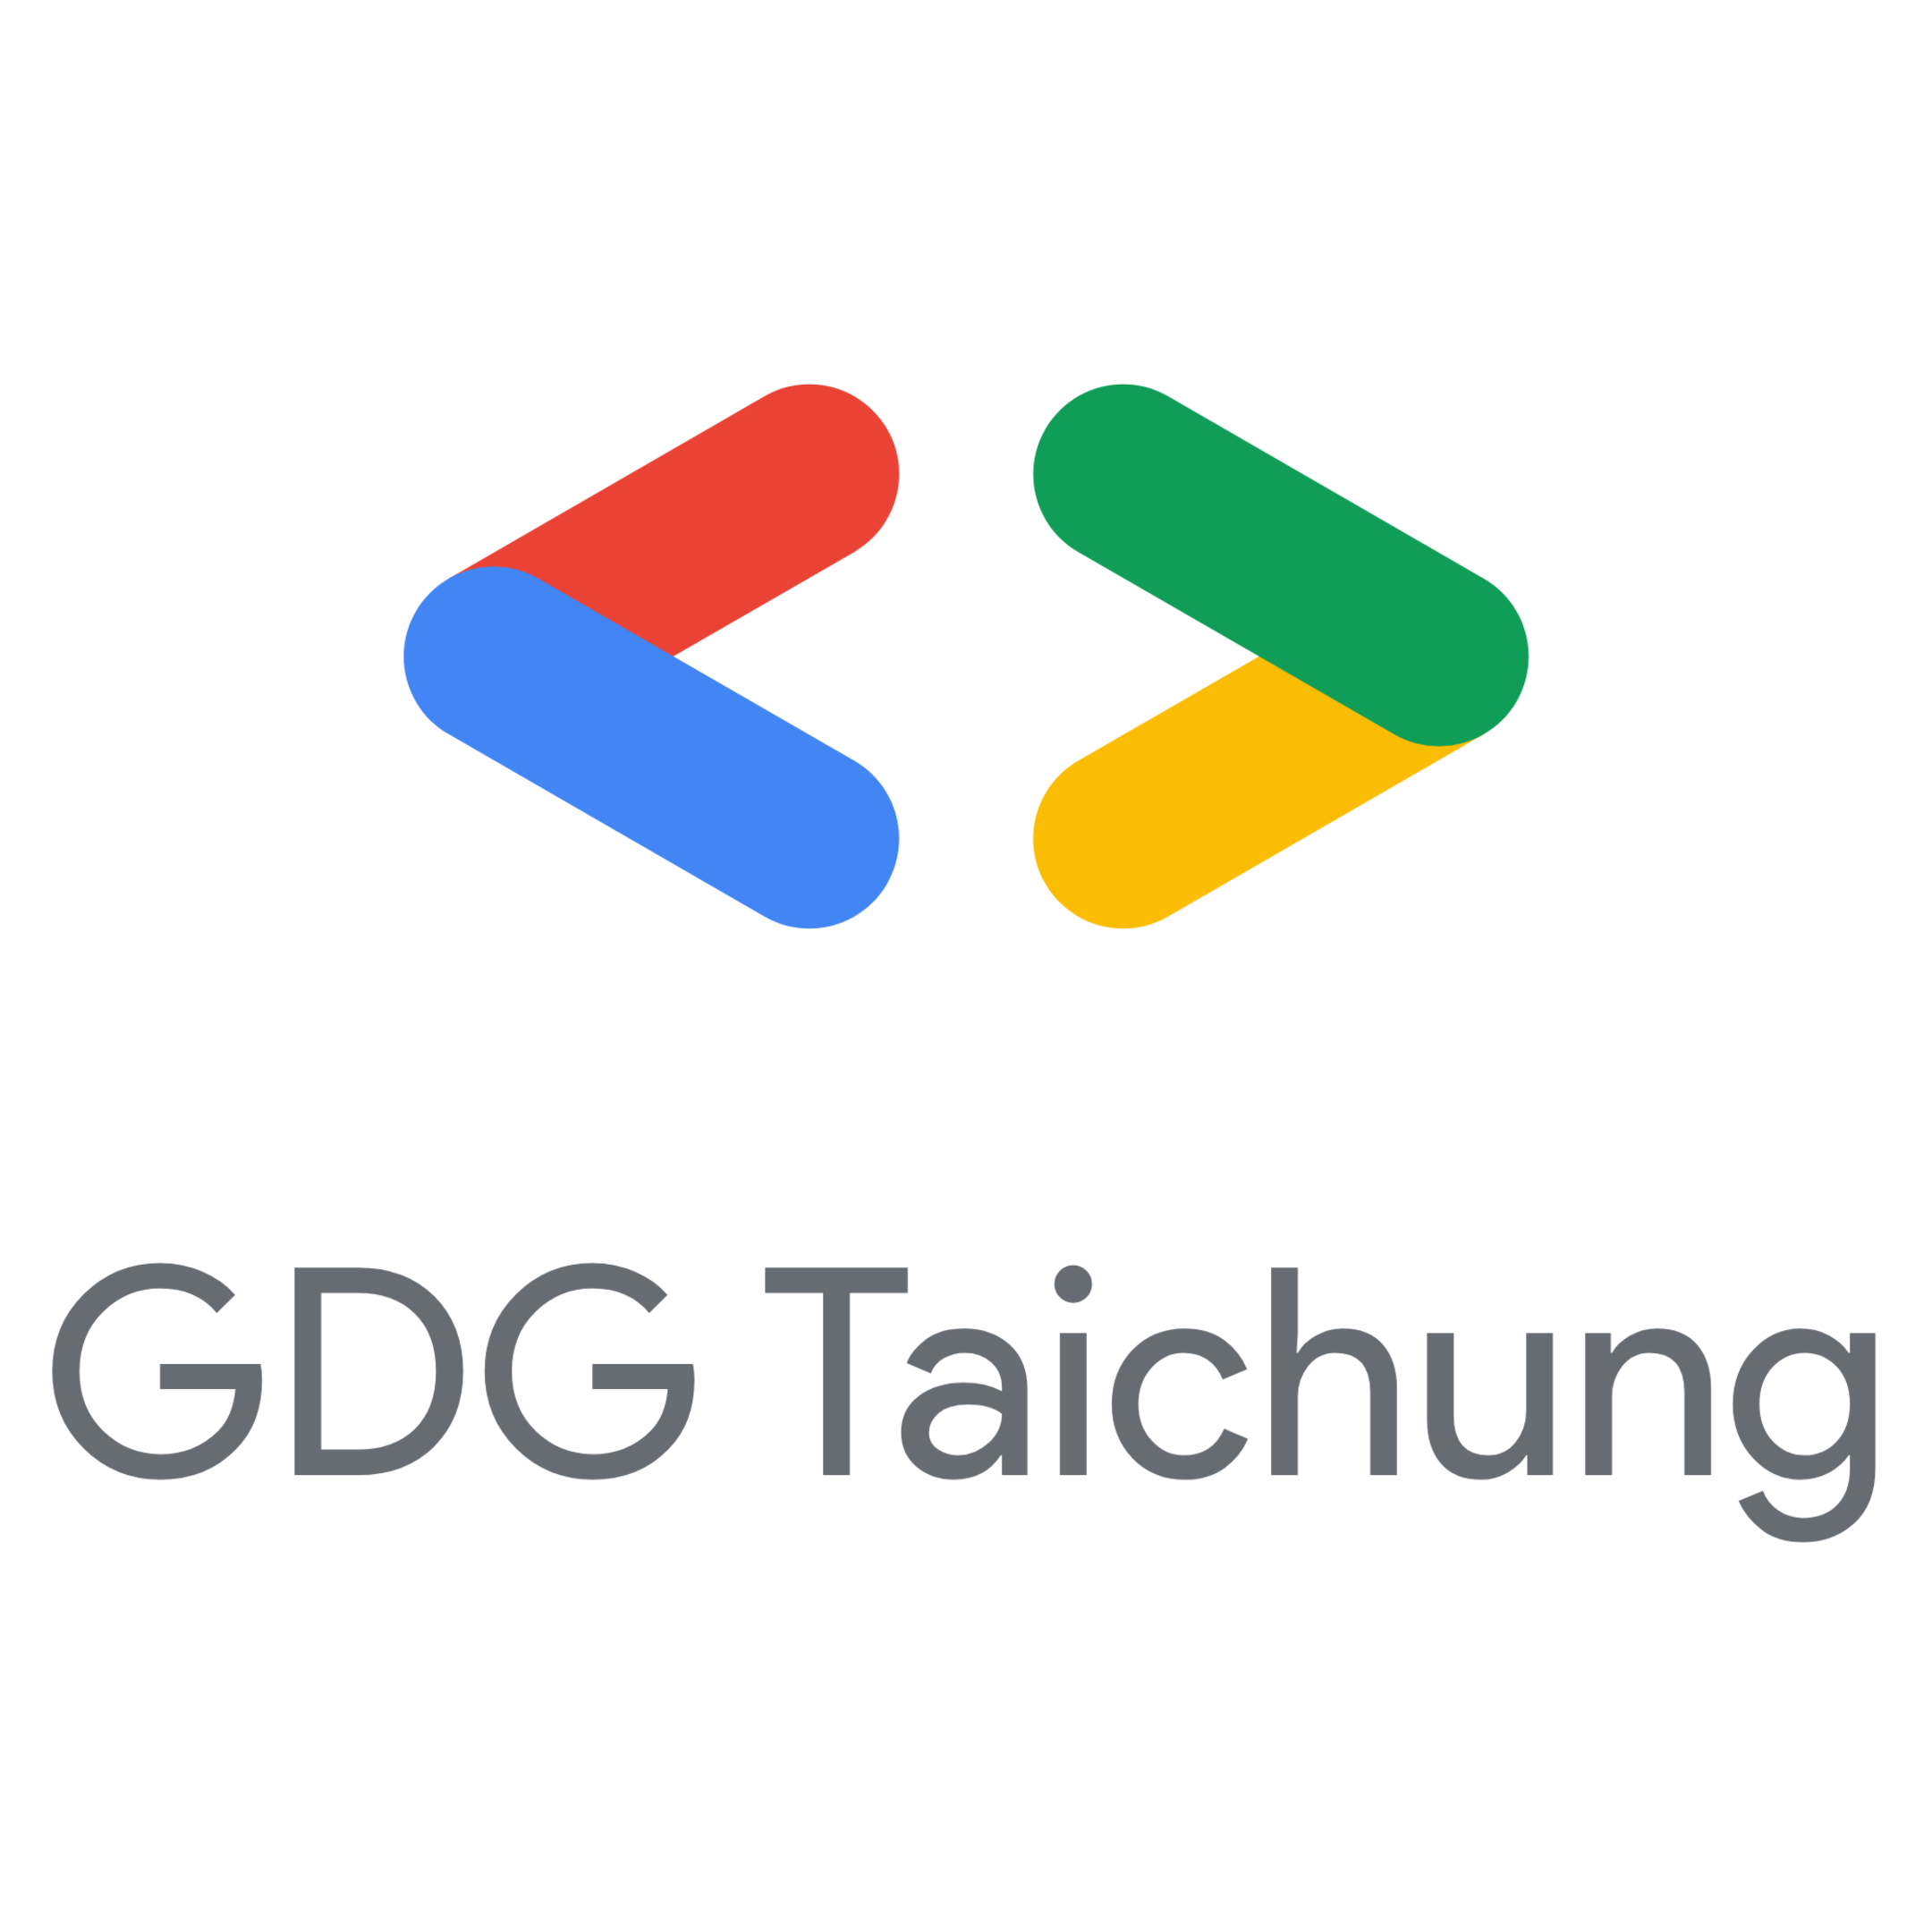 GDG Taichung